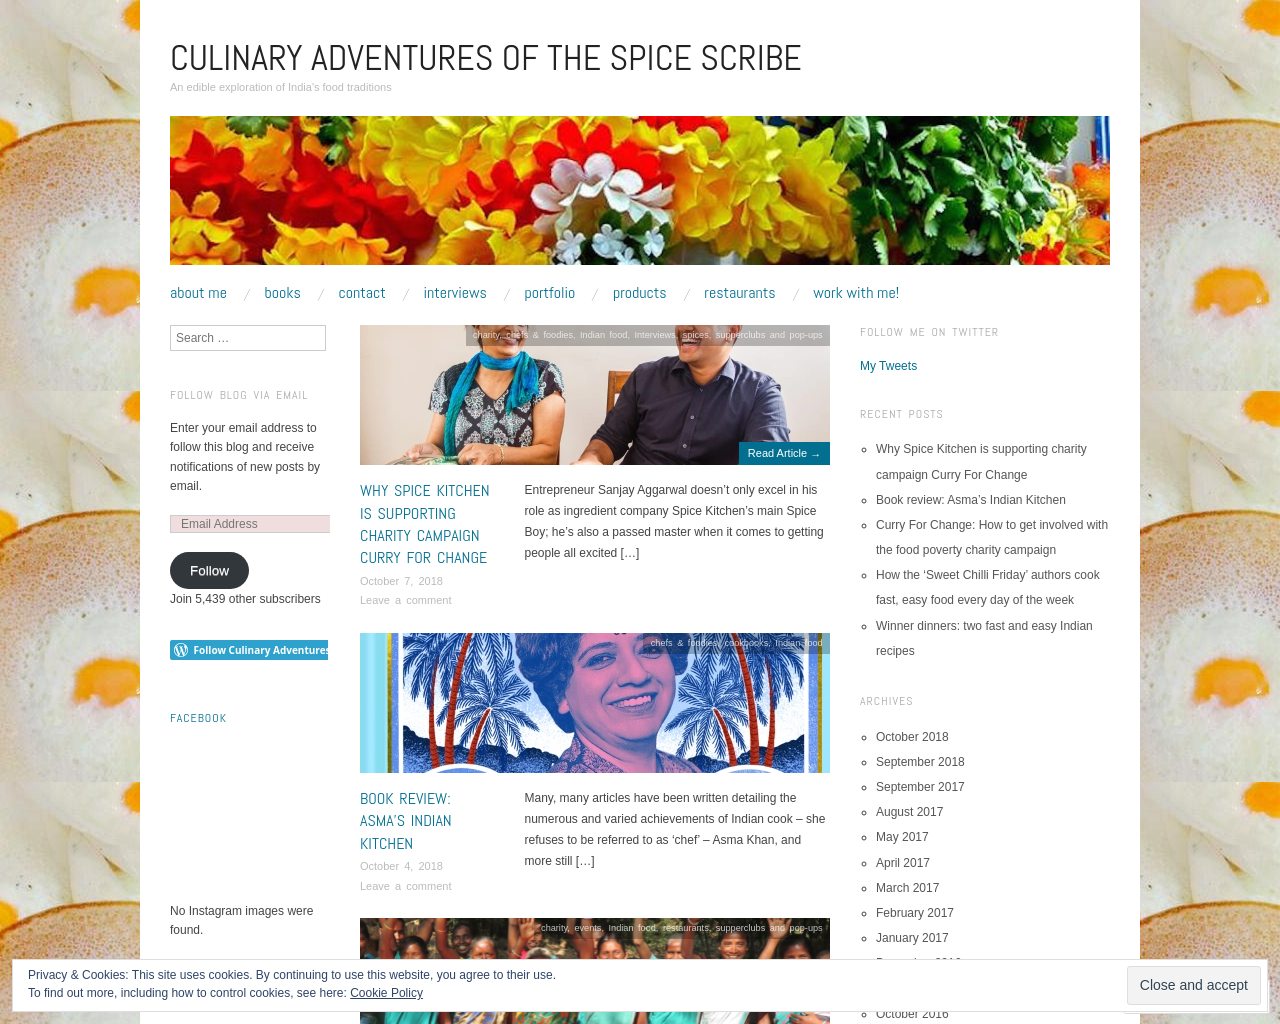 Culinary Adventures of The Spice Scribe